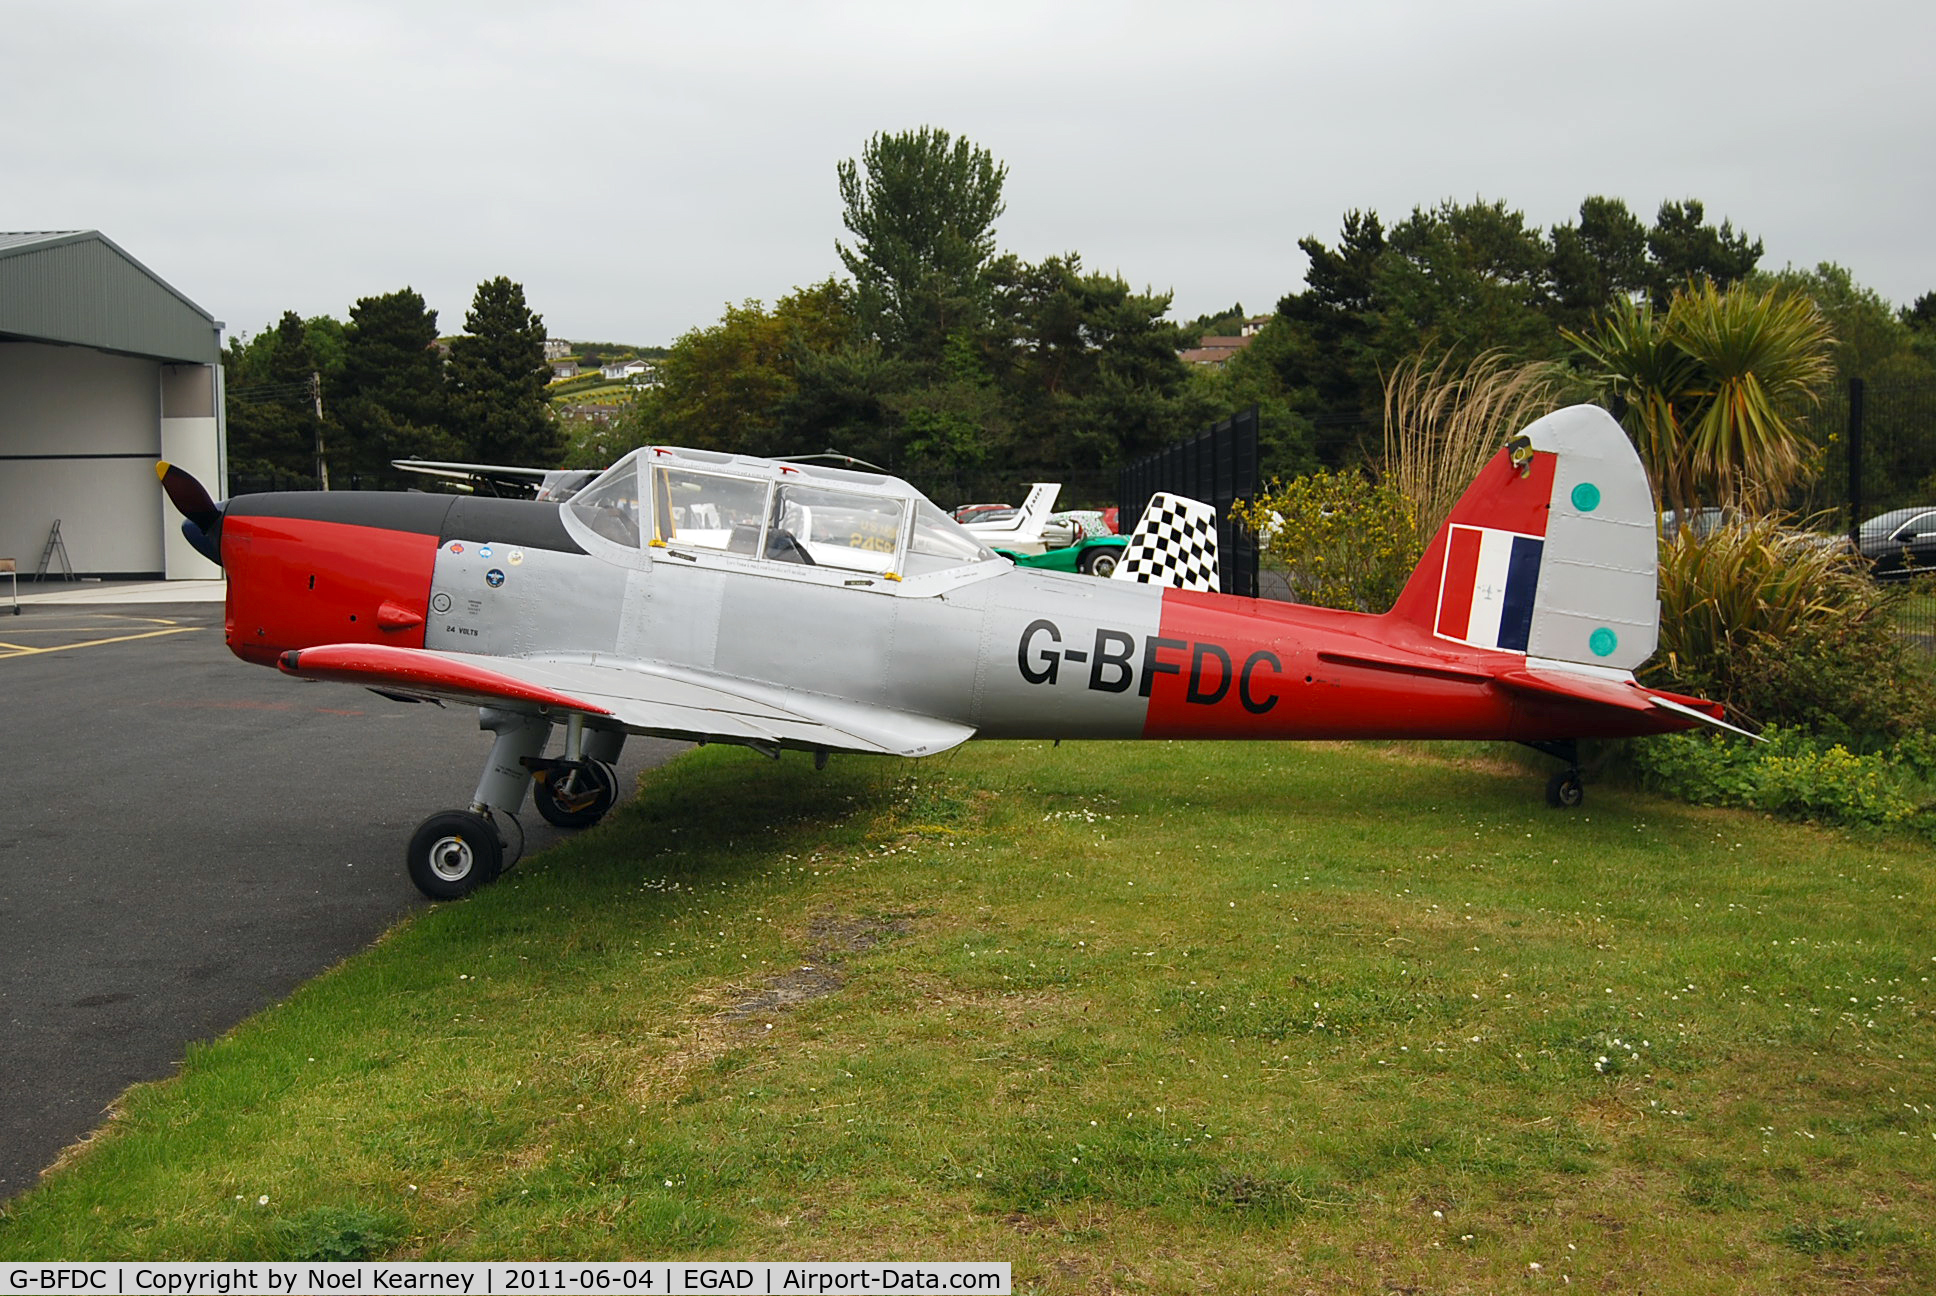 G-BFDC, 1959 De Havilland DHC-1 Chipmunk 22 C/N C1/0525, Parked on the apron at Newtownards Airfield.